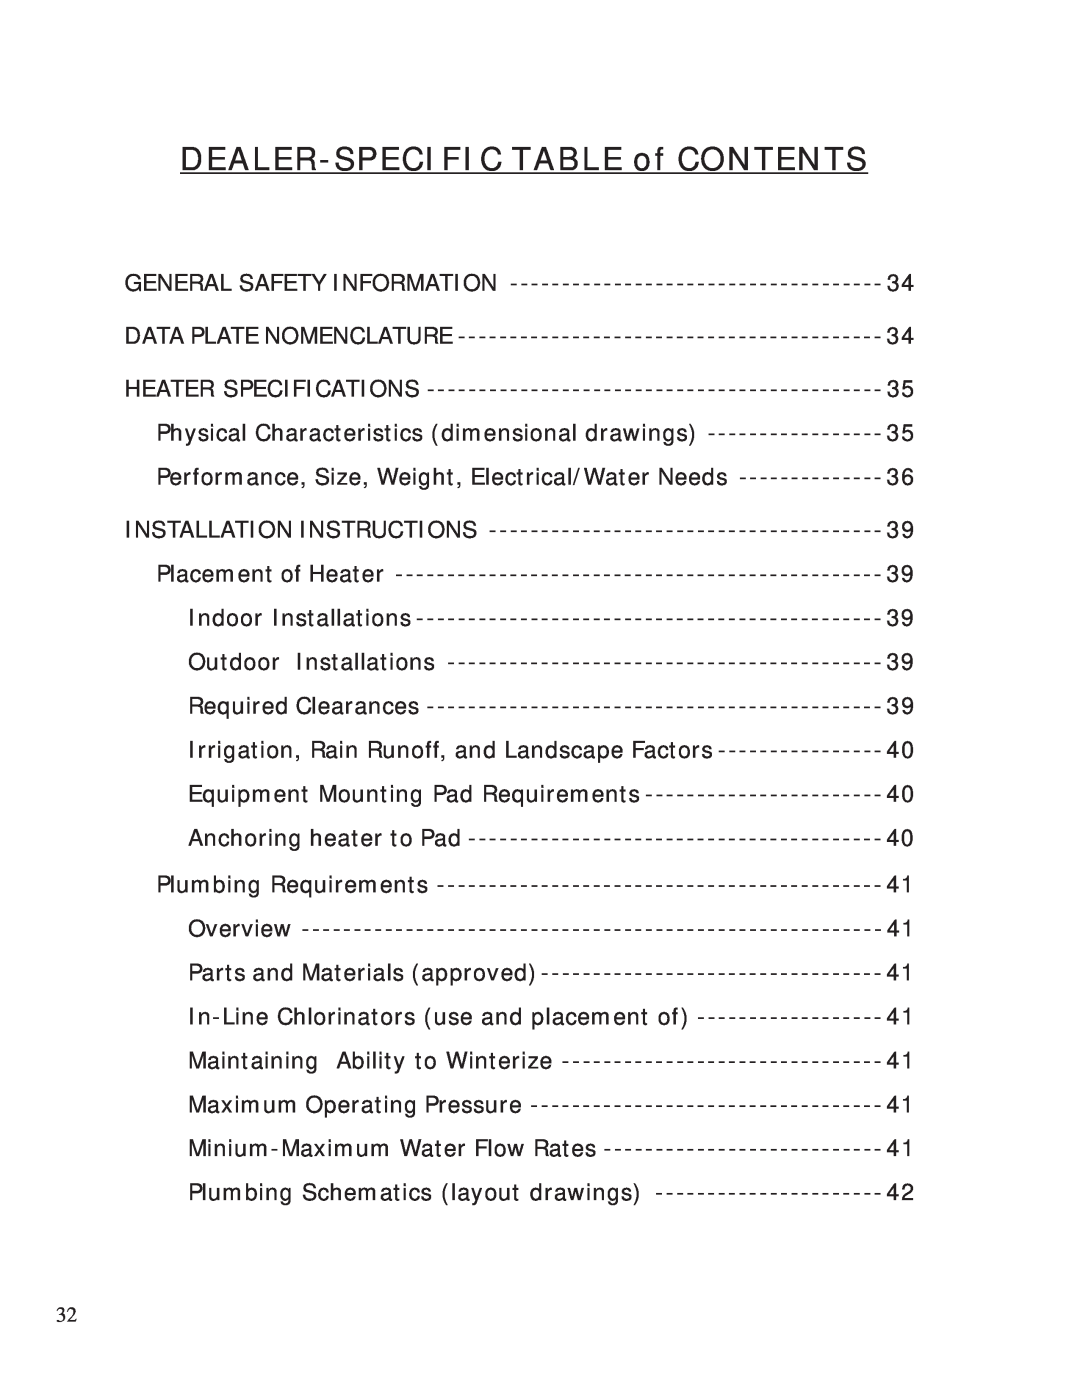 Aquacal 100 owner manual DEALER-SPECIFICTABLE of CONTENTS 